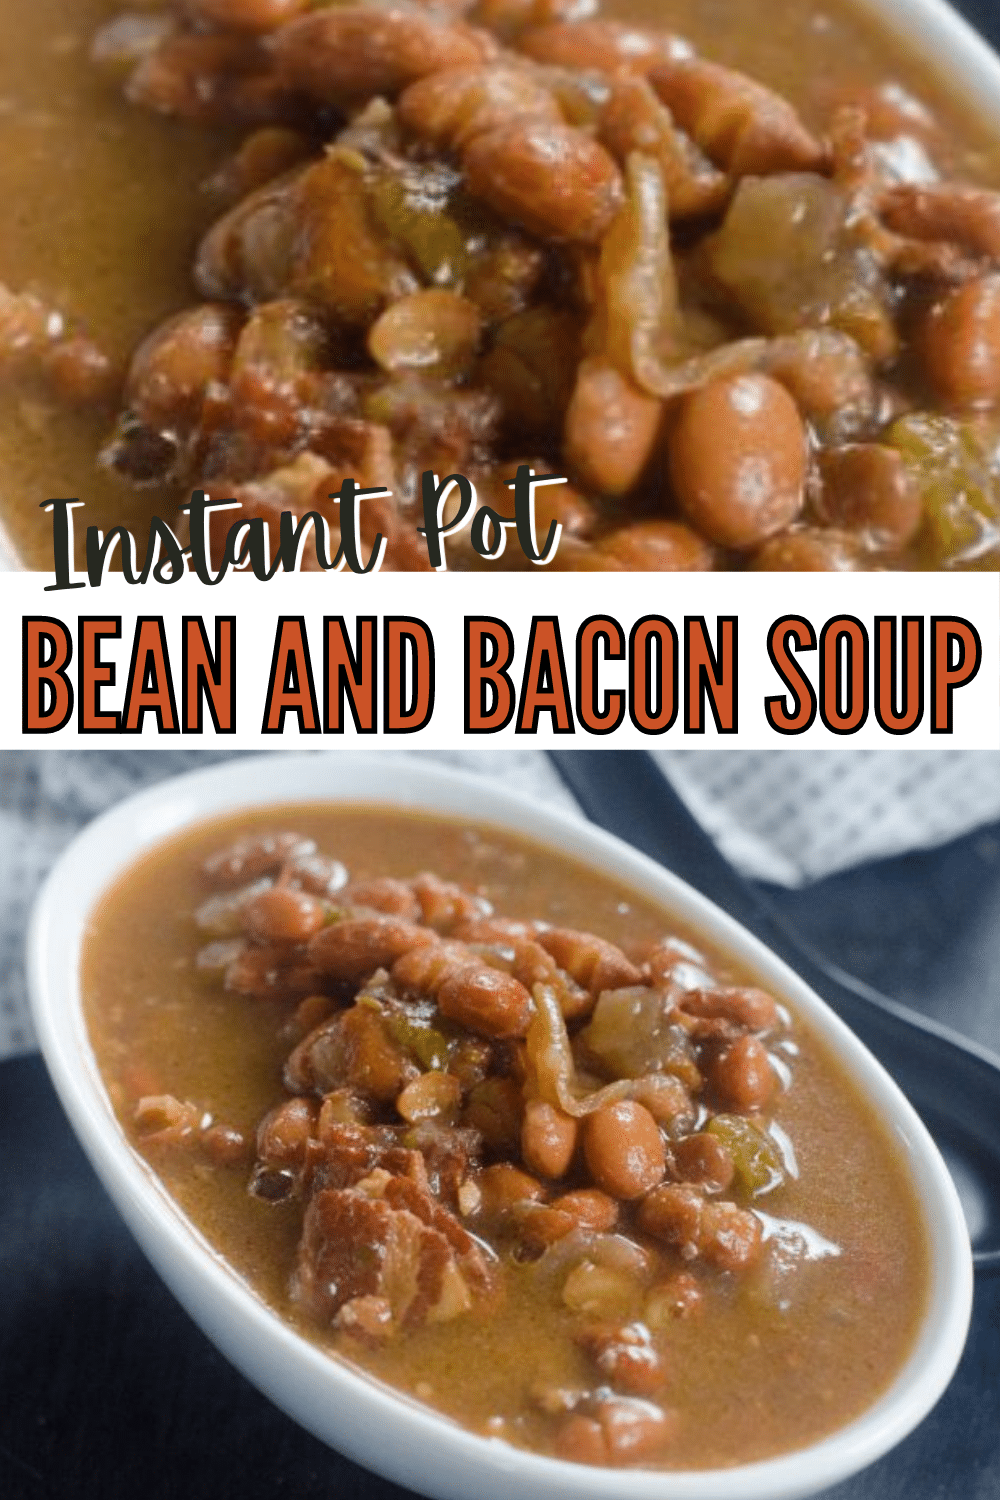 Comforting, easy and super delicious- You just can't go wrong with this instant pot bean and bacon soup for a lazy day's dinner. #instantpot #pressurecooker #soup #beanandbaconsoup via @wondermomwannab